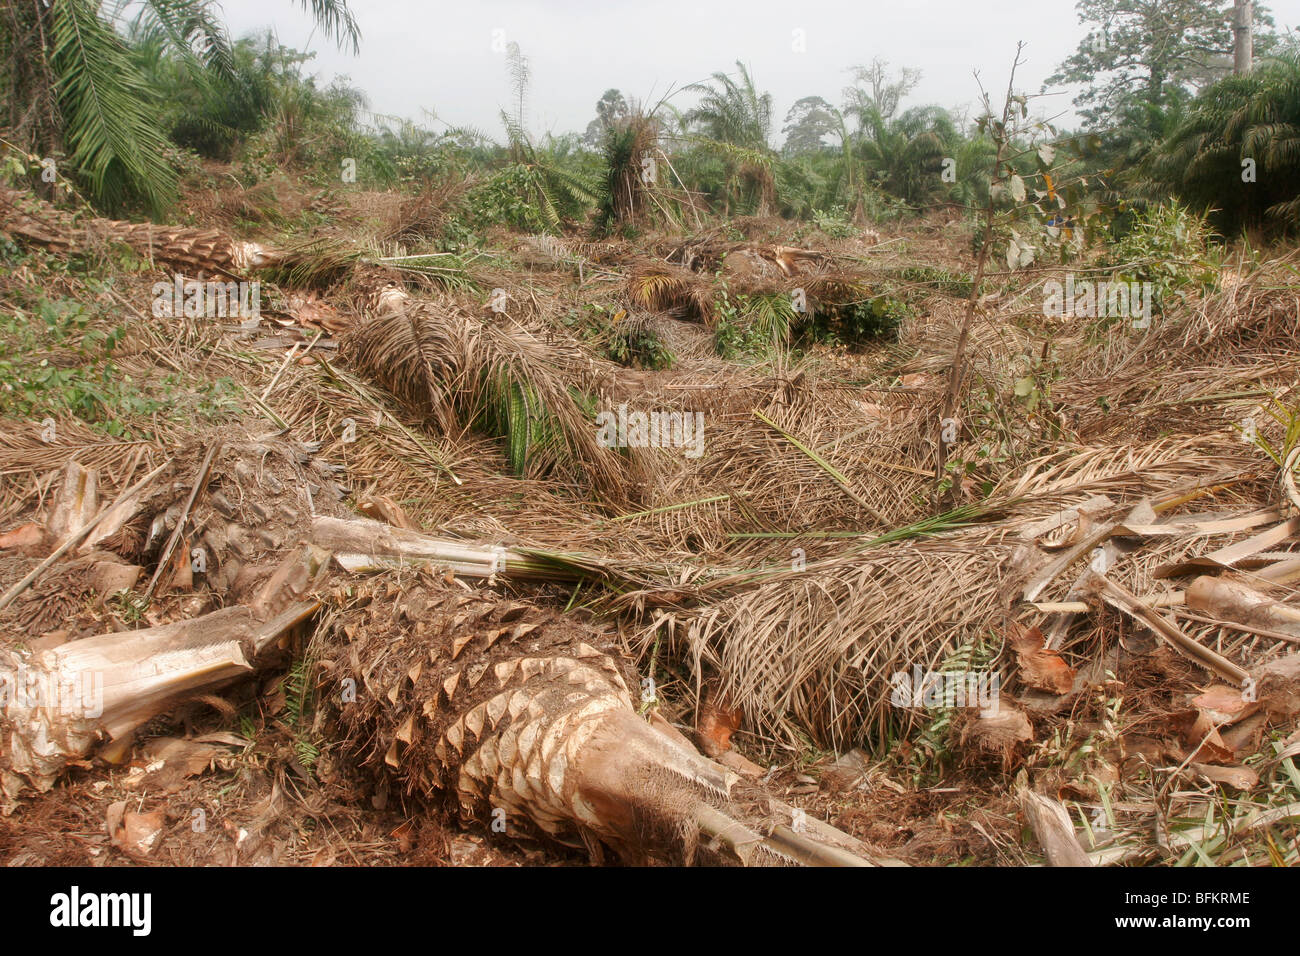 Felled Palm trees in a palm plantation. Busua Ghana. West Africa. Stock Photo